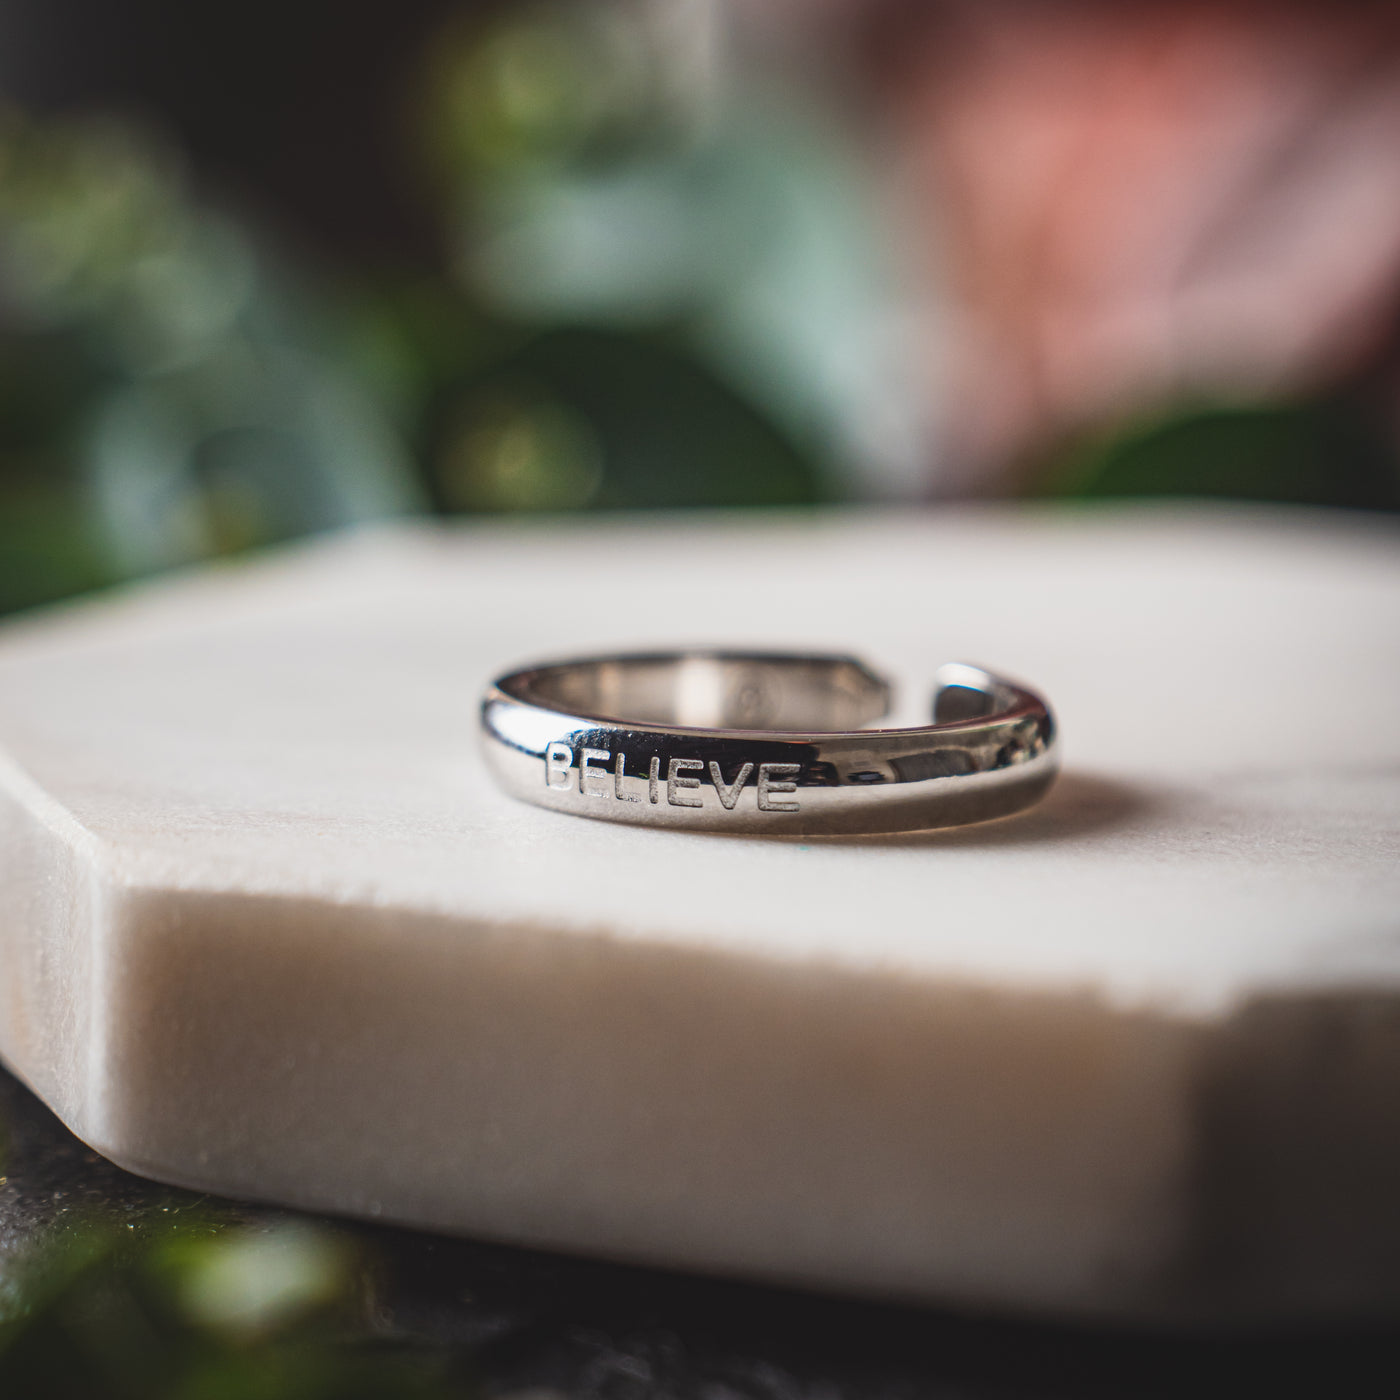 Shiny stainless steel ring with the word 'BELIEVE' engraved, placed on a soft-textured white surface with a blurred background of greenery.